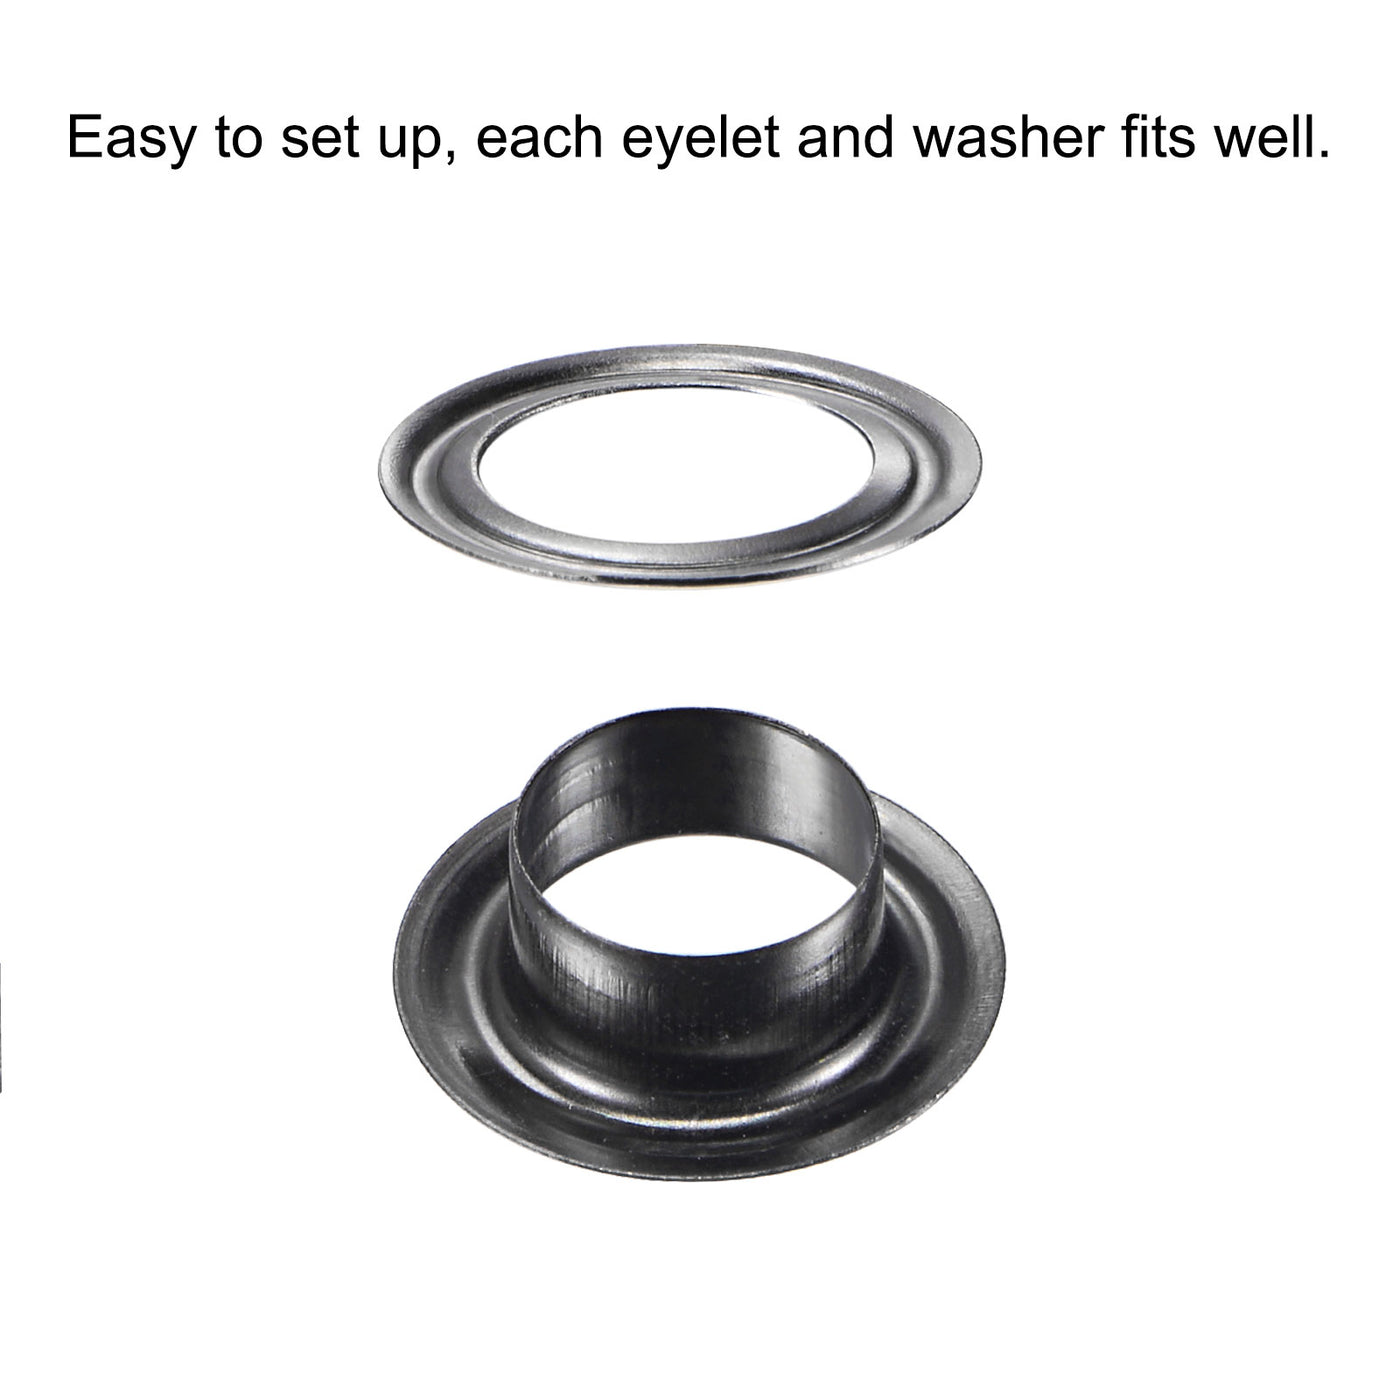 uxcell Uxcell 50Set 10.5mm Hole Copper Grommets Eyelets Dim Grey for Fabric Leather